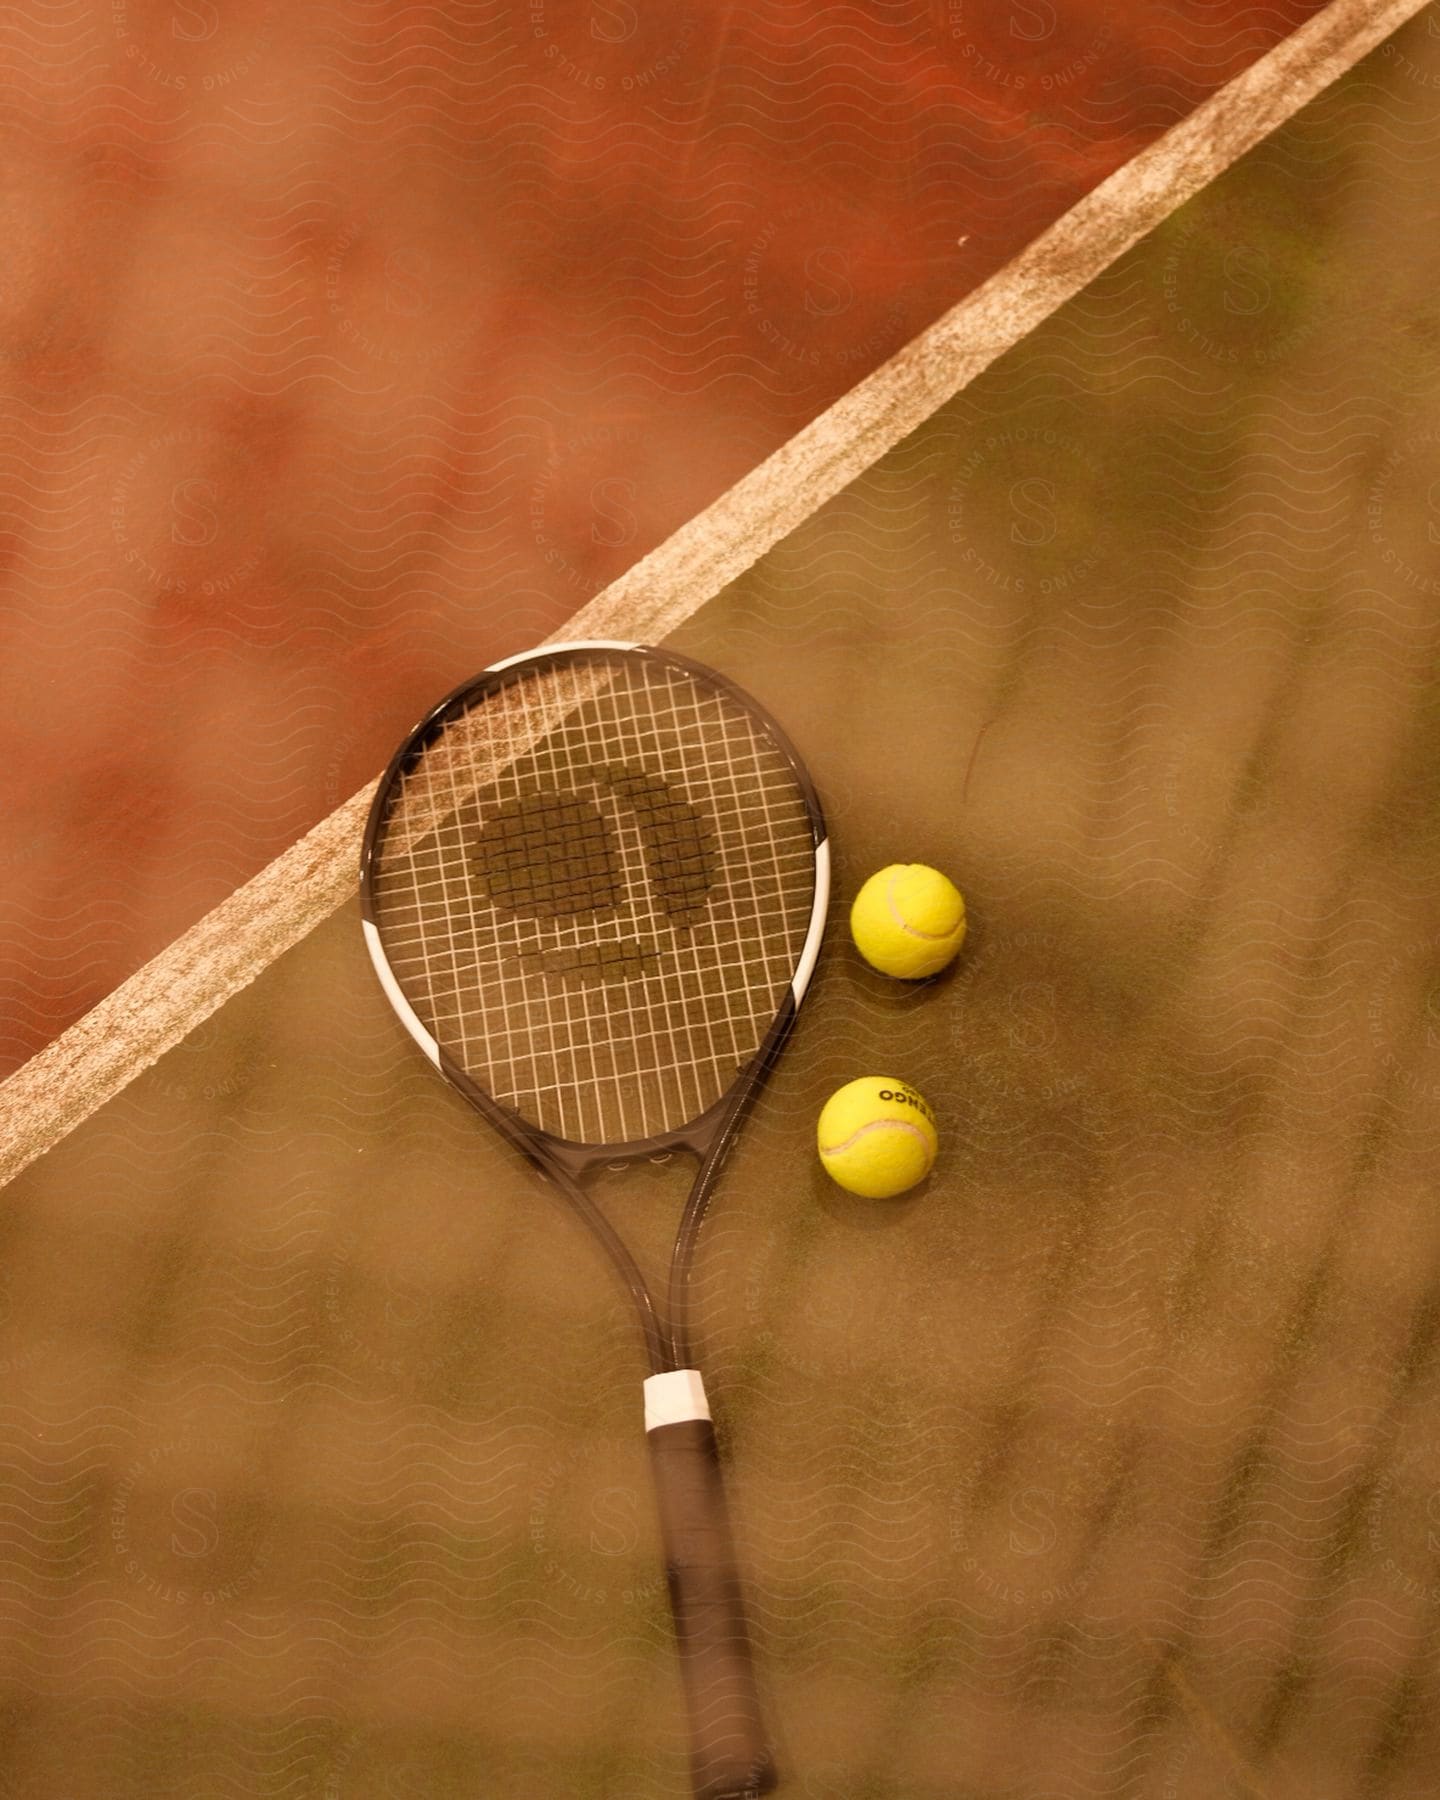 Tennis racket and two yellow balls on a clay court, with white boundary line visible.